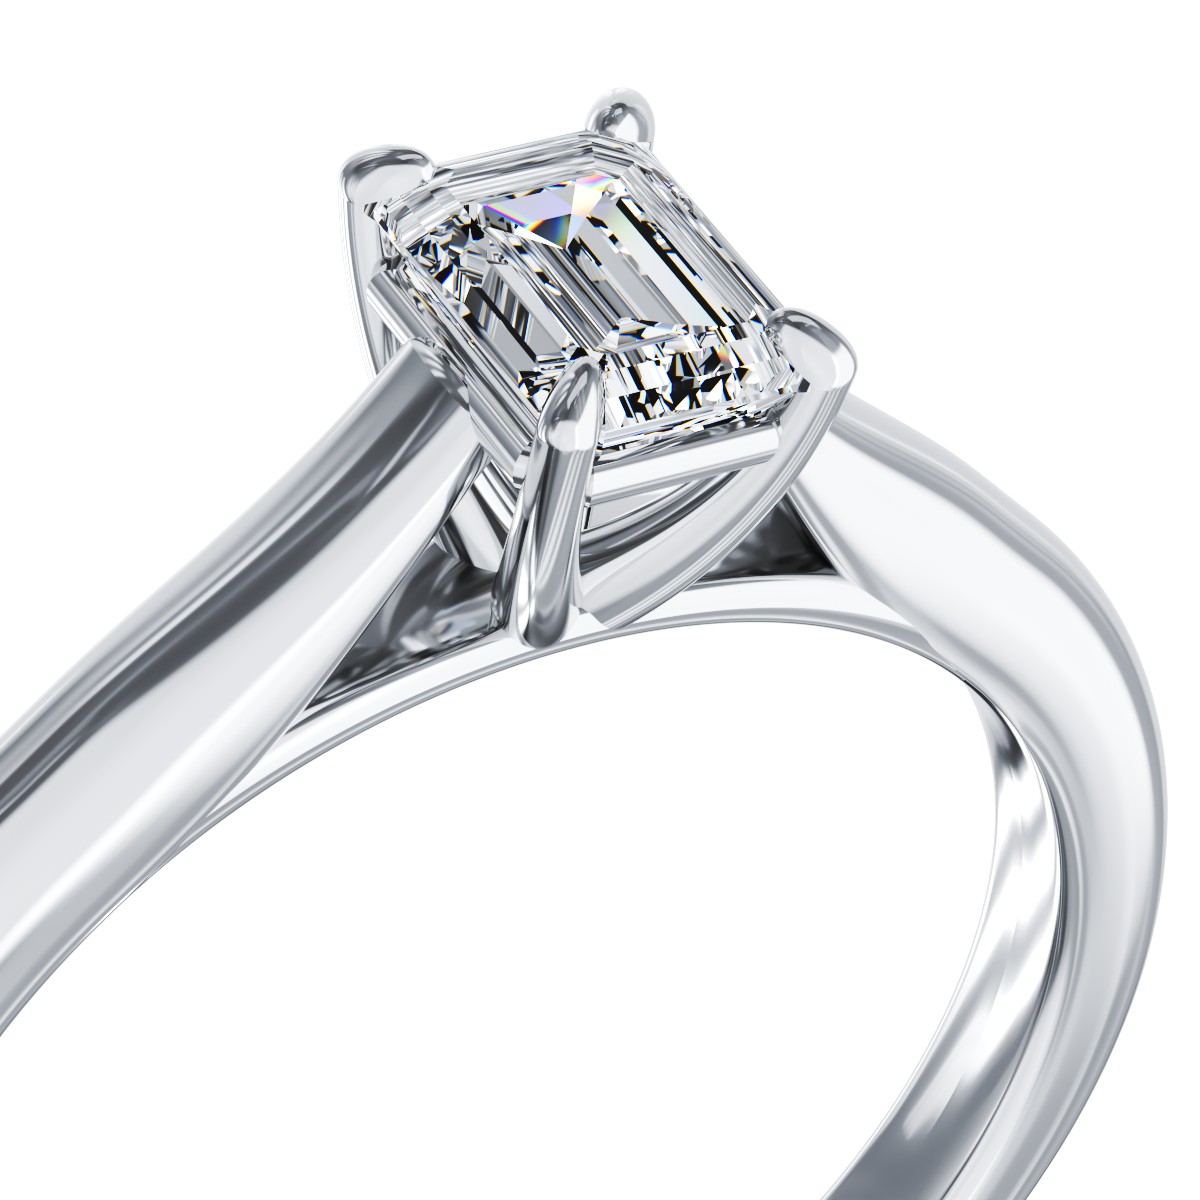 Platinum engagement ring with a 0.4ct solitaire diamond